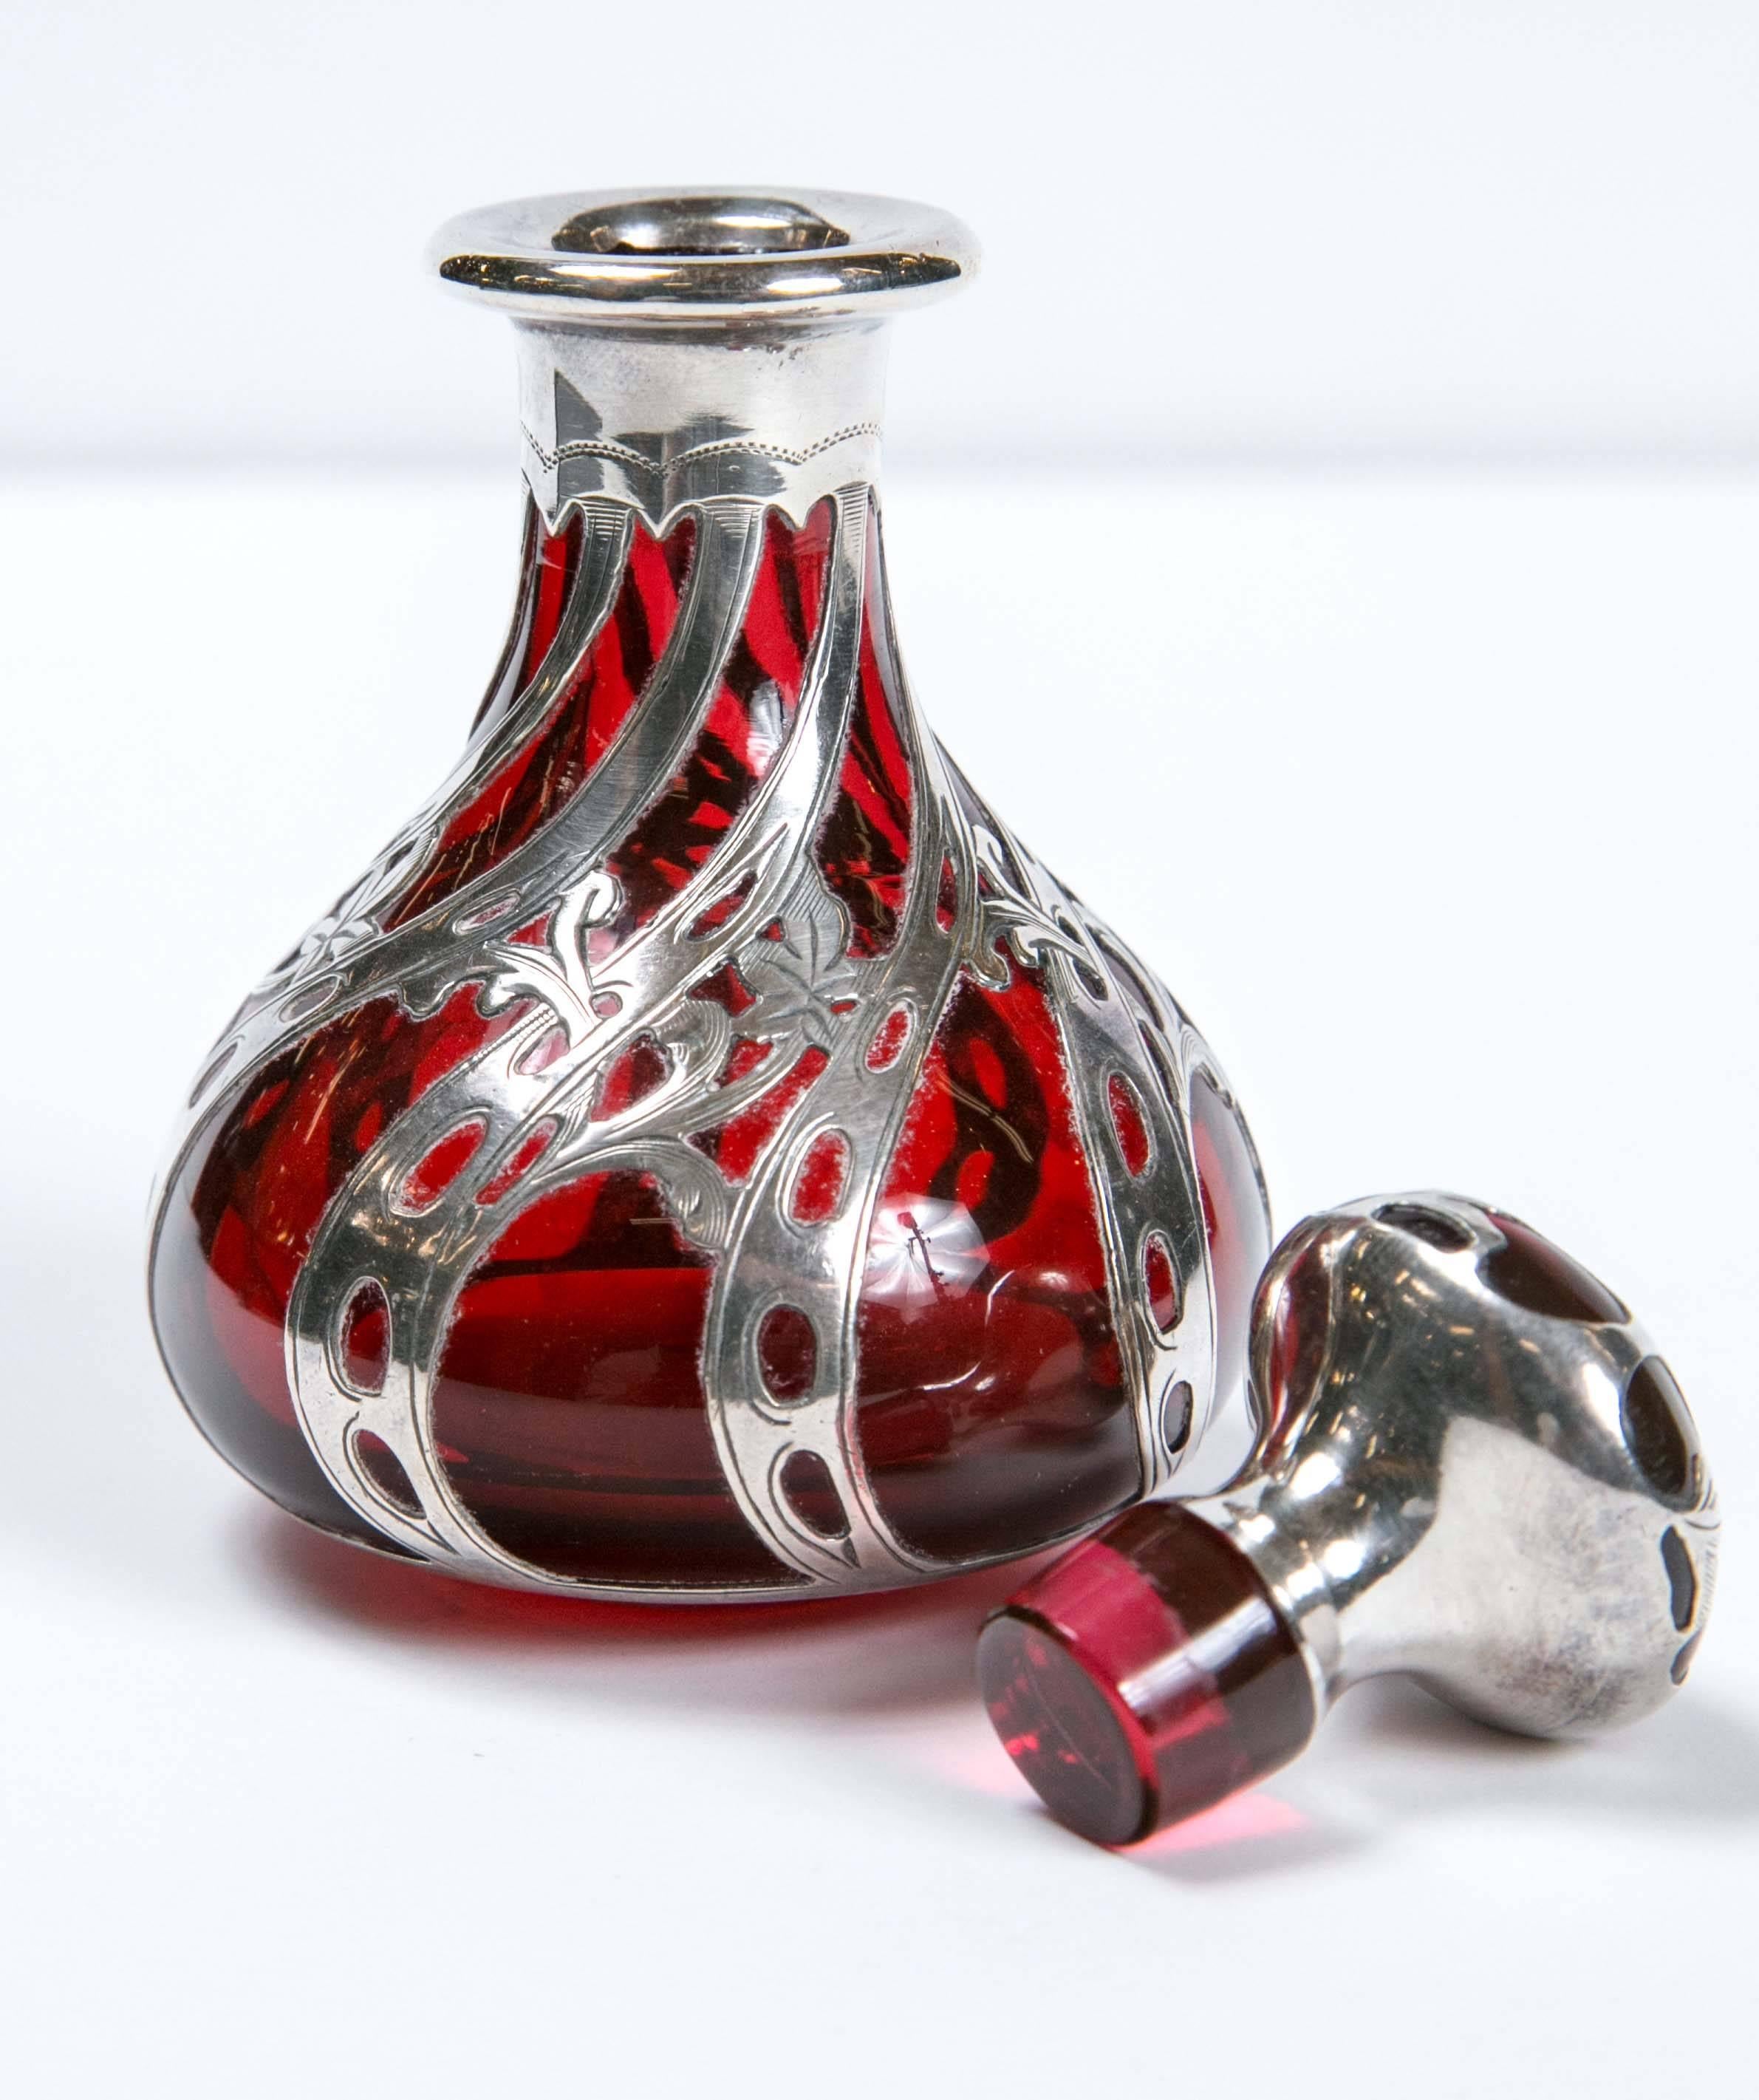 Gorgeous American antique sterling silver overlay ruby red perfume bottle.
All sterling silver overlay in perfect condition and bottle as well. Perfect to add any vanity.